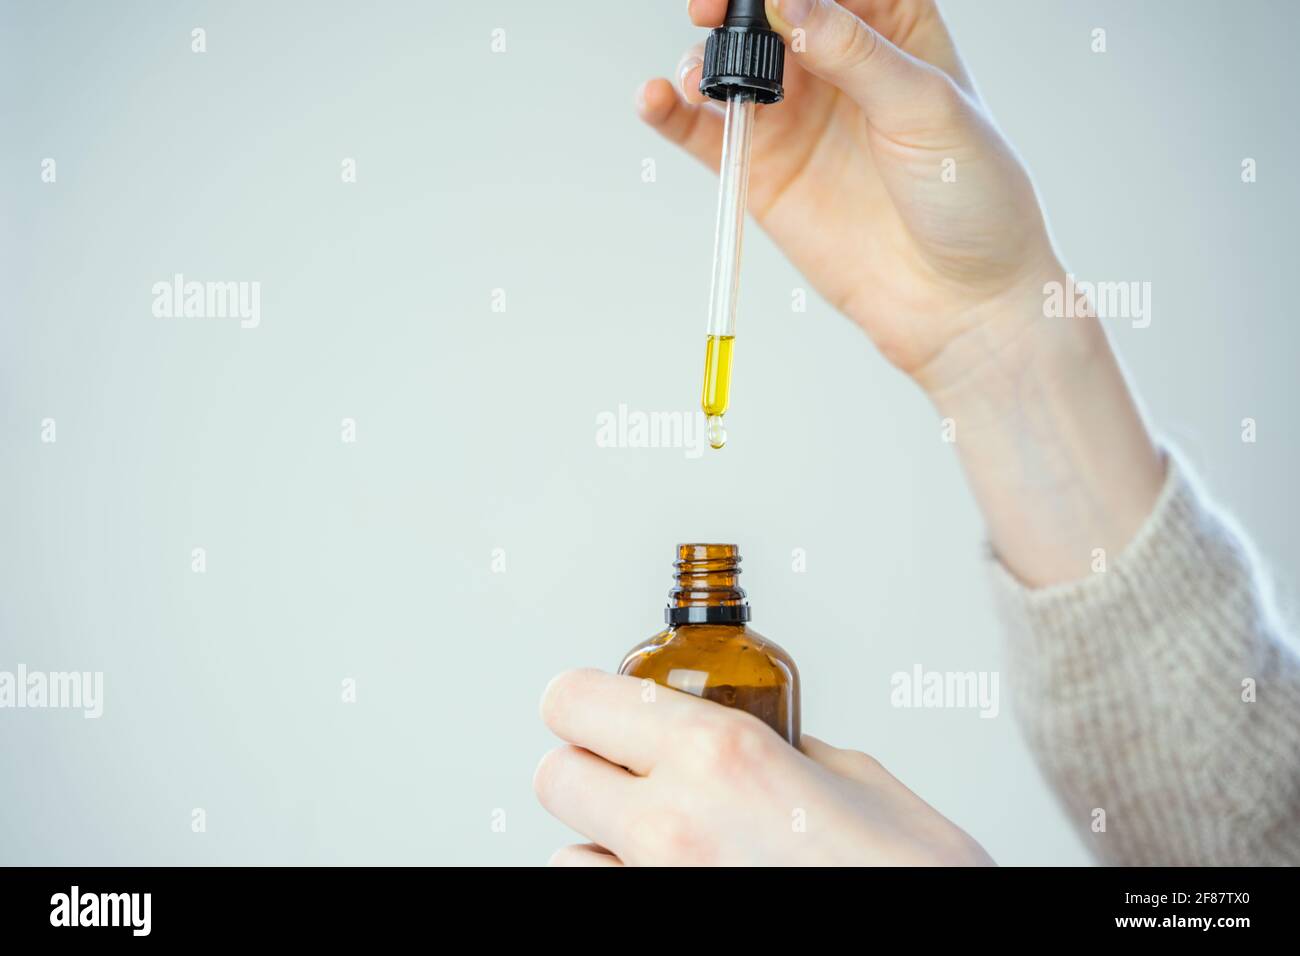 close up of droplet dosing a biological and ecological hemp plant herbal pharmaceutical cbd oil from a jar. Stock Photo